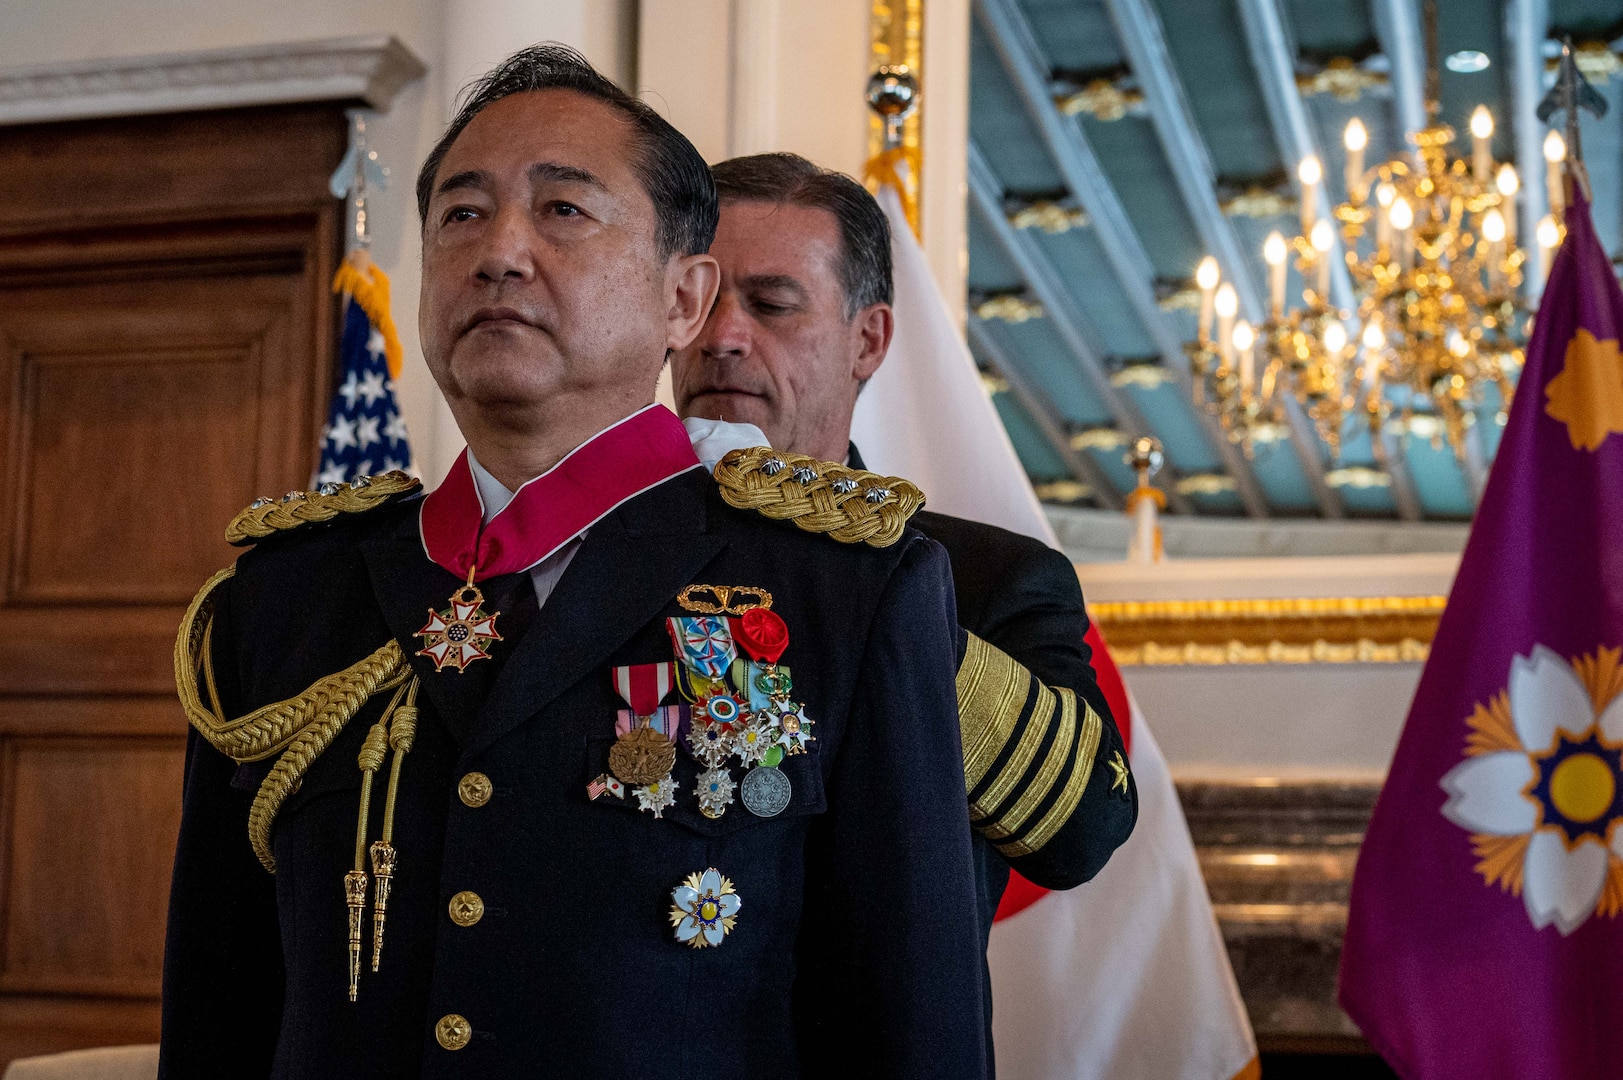 TOKYO (March 19, 2023) Gen. Kōji Yamazaki, Chief of Staff, Joint Staff of the Japan Self-Defense Forces, receives the Legion of Merit medal pinned by Adm. John C. Aquilino, Commander U.S. Indo-Pacific Command, in Tokyo. Yamazaki received the award for exceptionally meritorious service, where his professionalism, initiative and dedication to duty resulted in significant advancements in the United States-Japan mutual security partnership, expansions to the Self-Defense Forces contributions regionally and globally, updates to force posture and continuous bilateral information exchange. (U.S. Navy photo by Chief Mass Communication Specialist Shannon M. Smith)